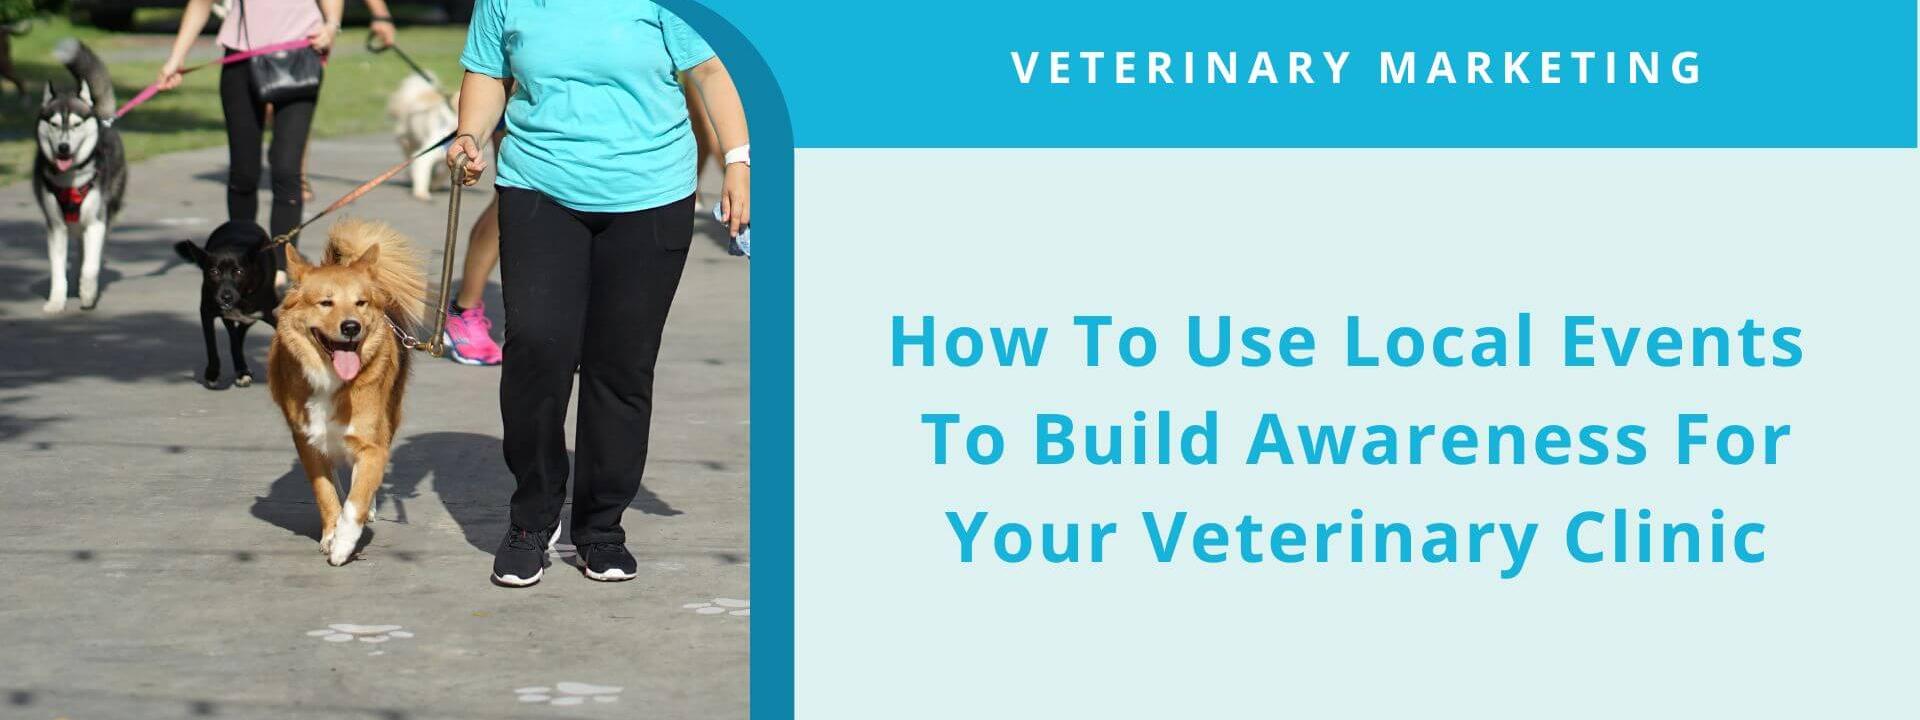 How To Use Local Events To Build Awareness For Your Veterinary Clinic